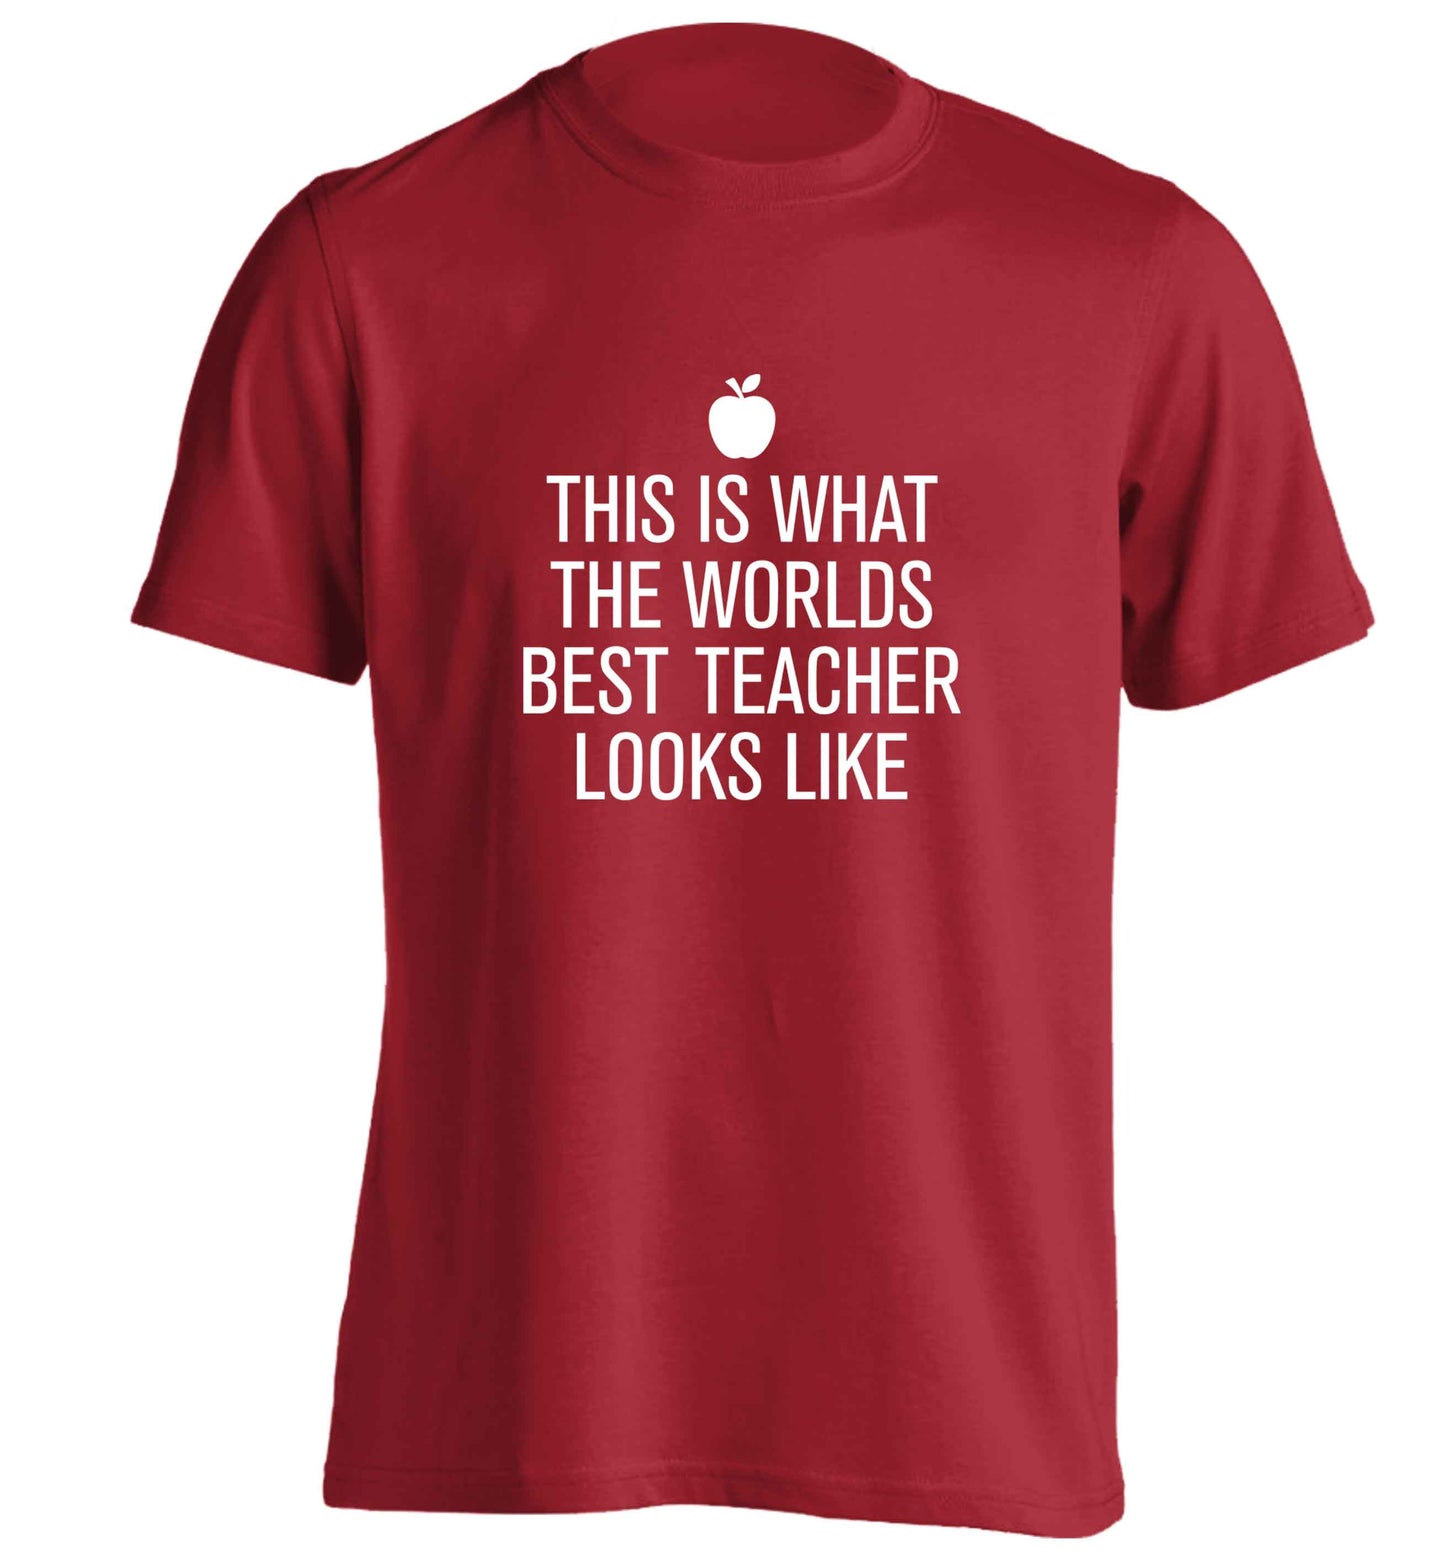 This is what the worlds best teacher looks like adults unisex red Tshirt 2XL